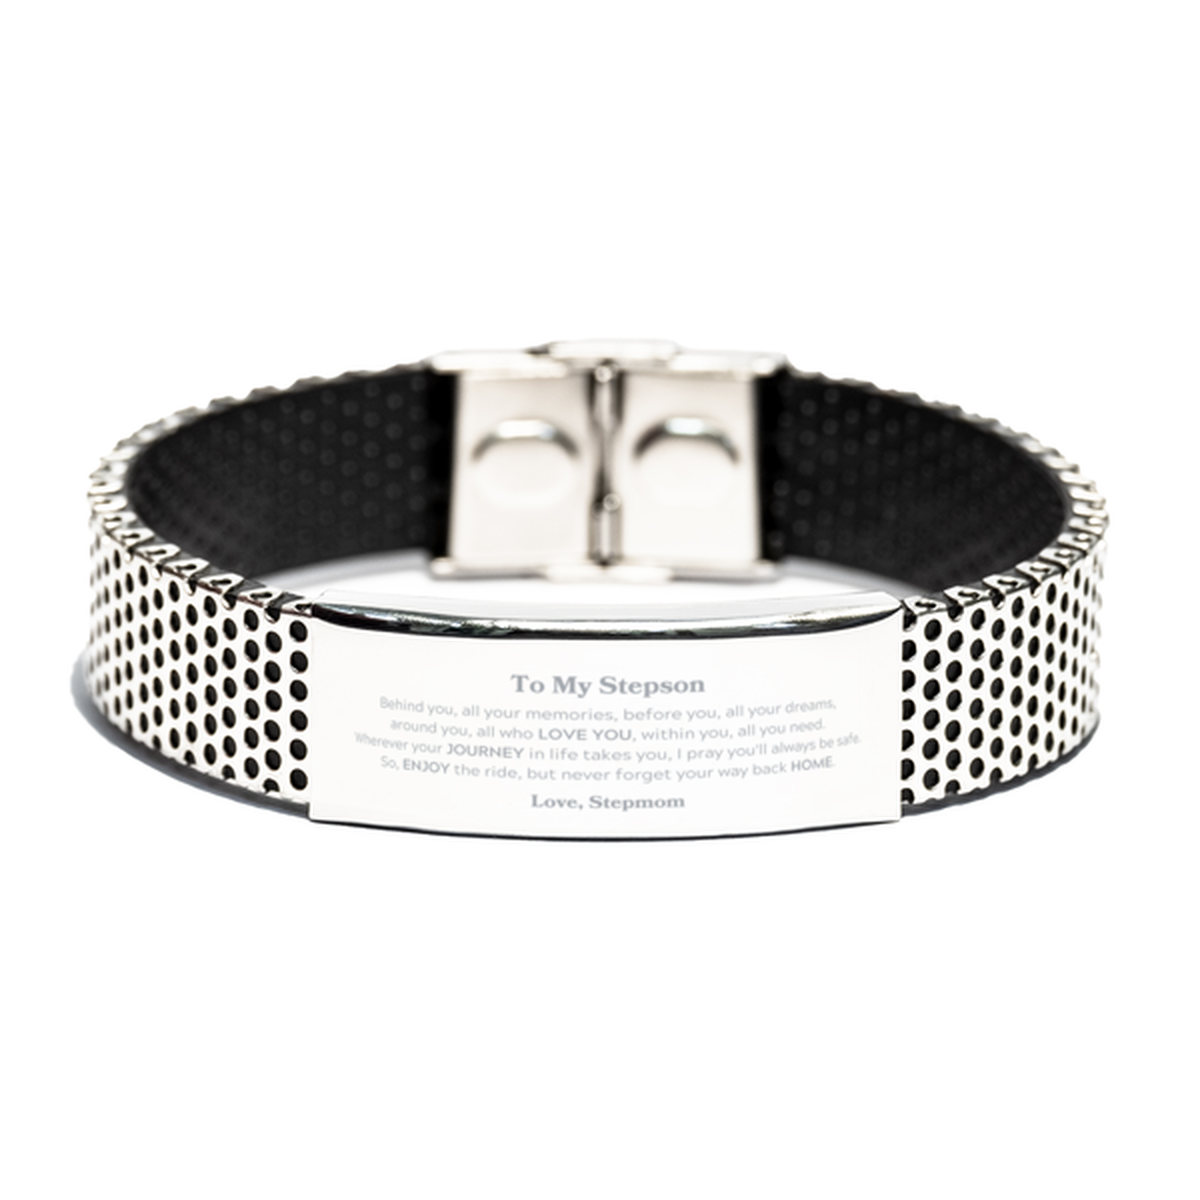 To My Stepson Graduation Gifts from Stepmom, Stepson Stainless Steel Bracelet Christmas Birthday Gifts for Stepson Behind you, all your memories, before you, all your dreams. Love, Stepmom